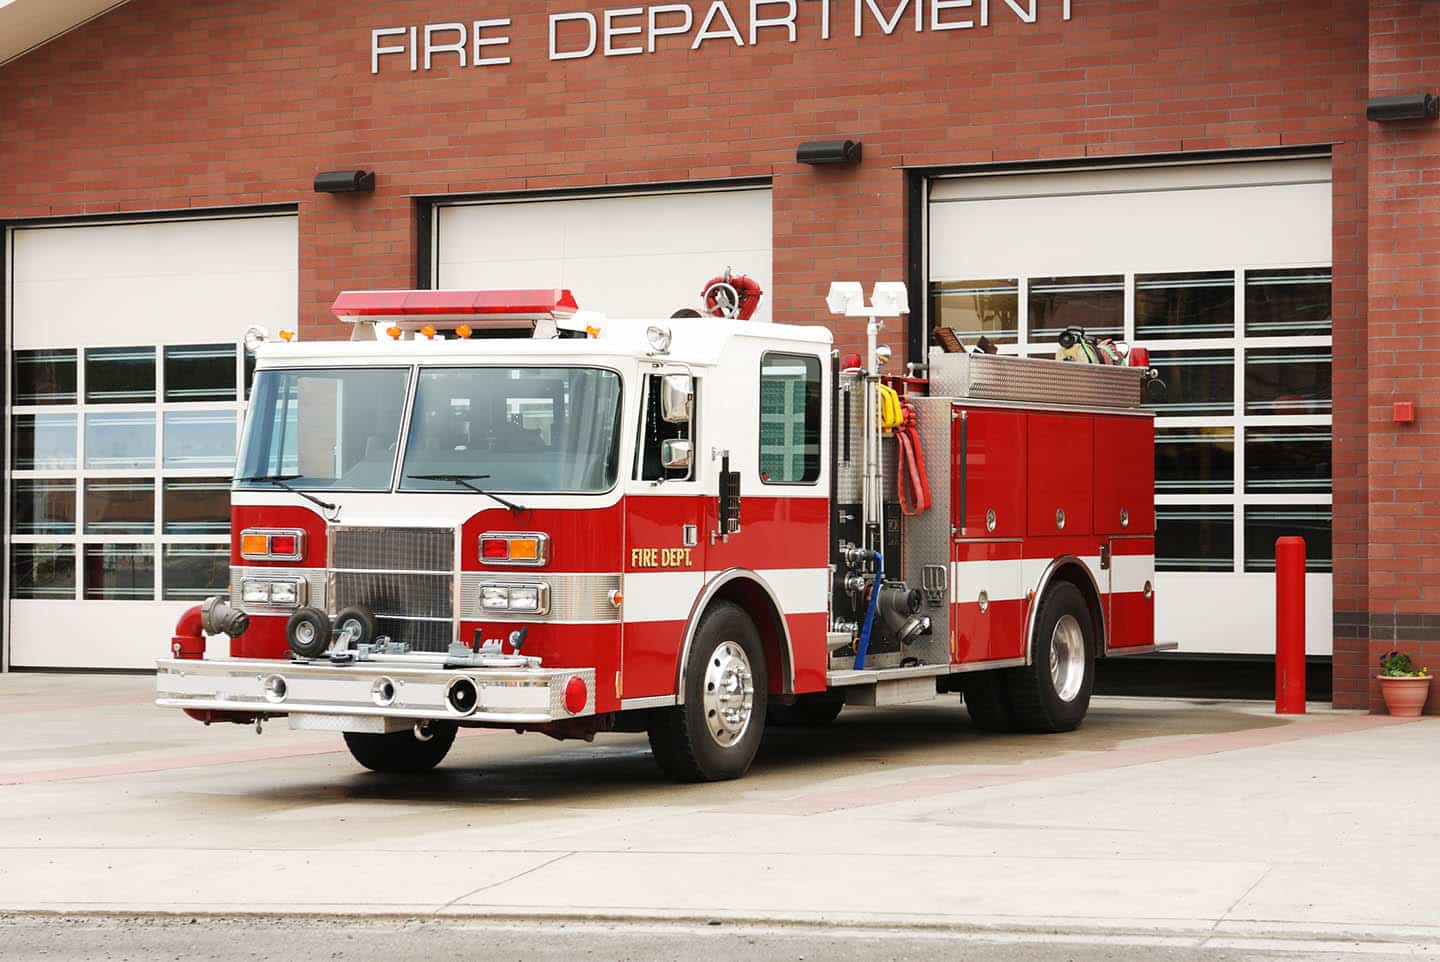 Grants: How They Work for Fire Departments and How Vector Solutions Simplifies the Process